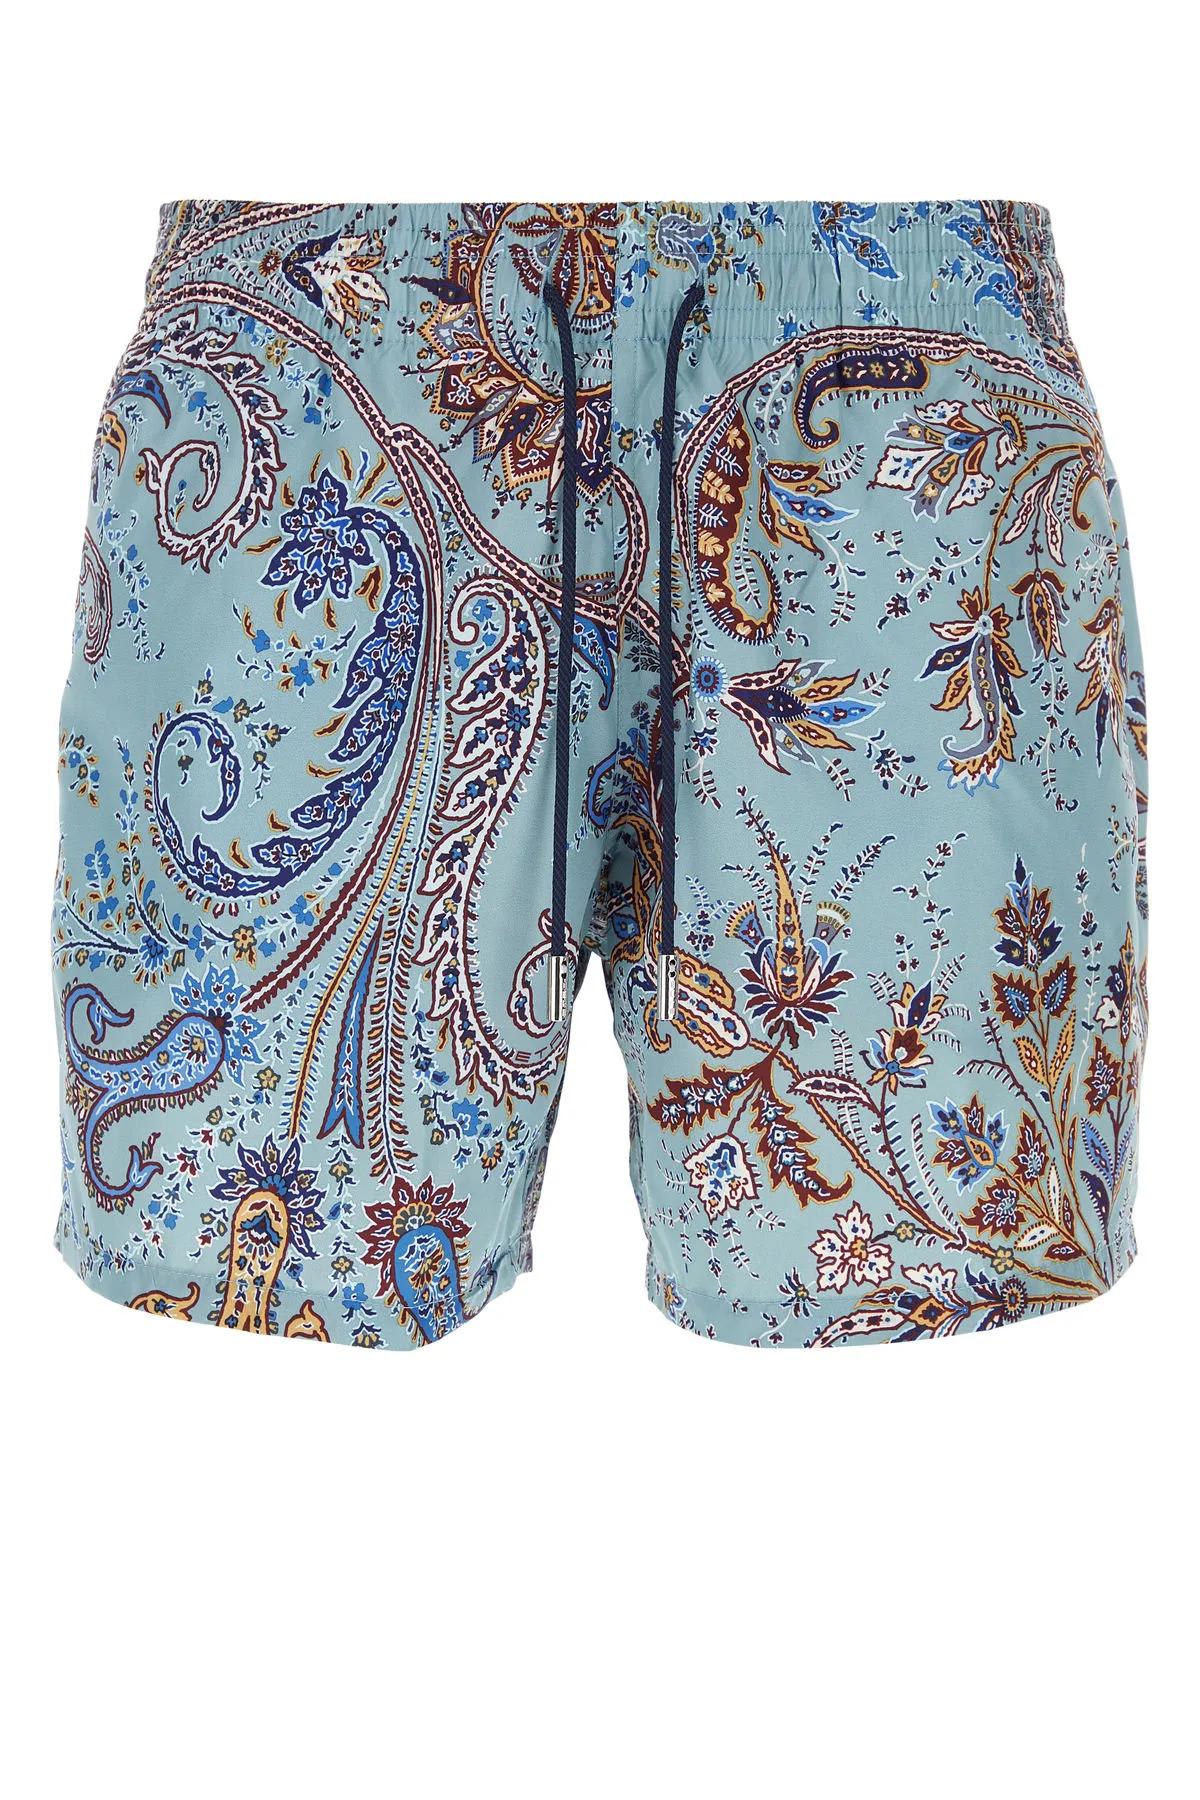 ETRO PRINTED POLYESTER SWIMMING SHORTS